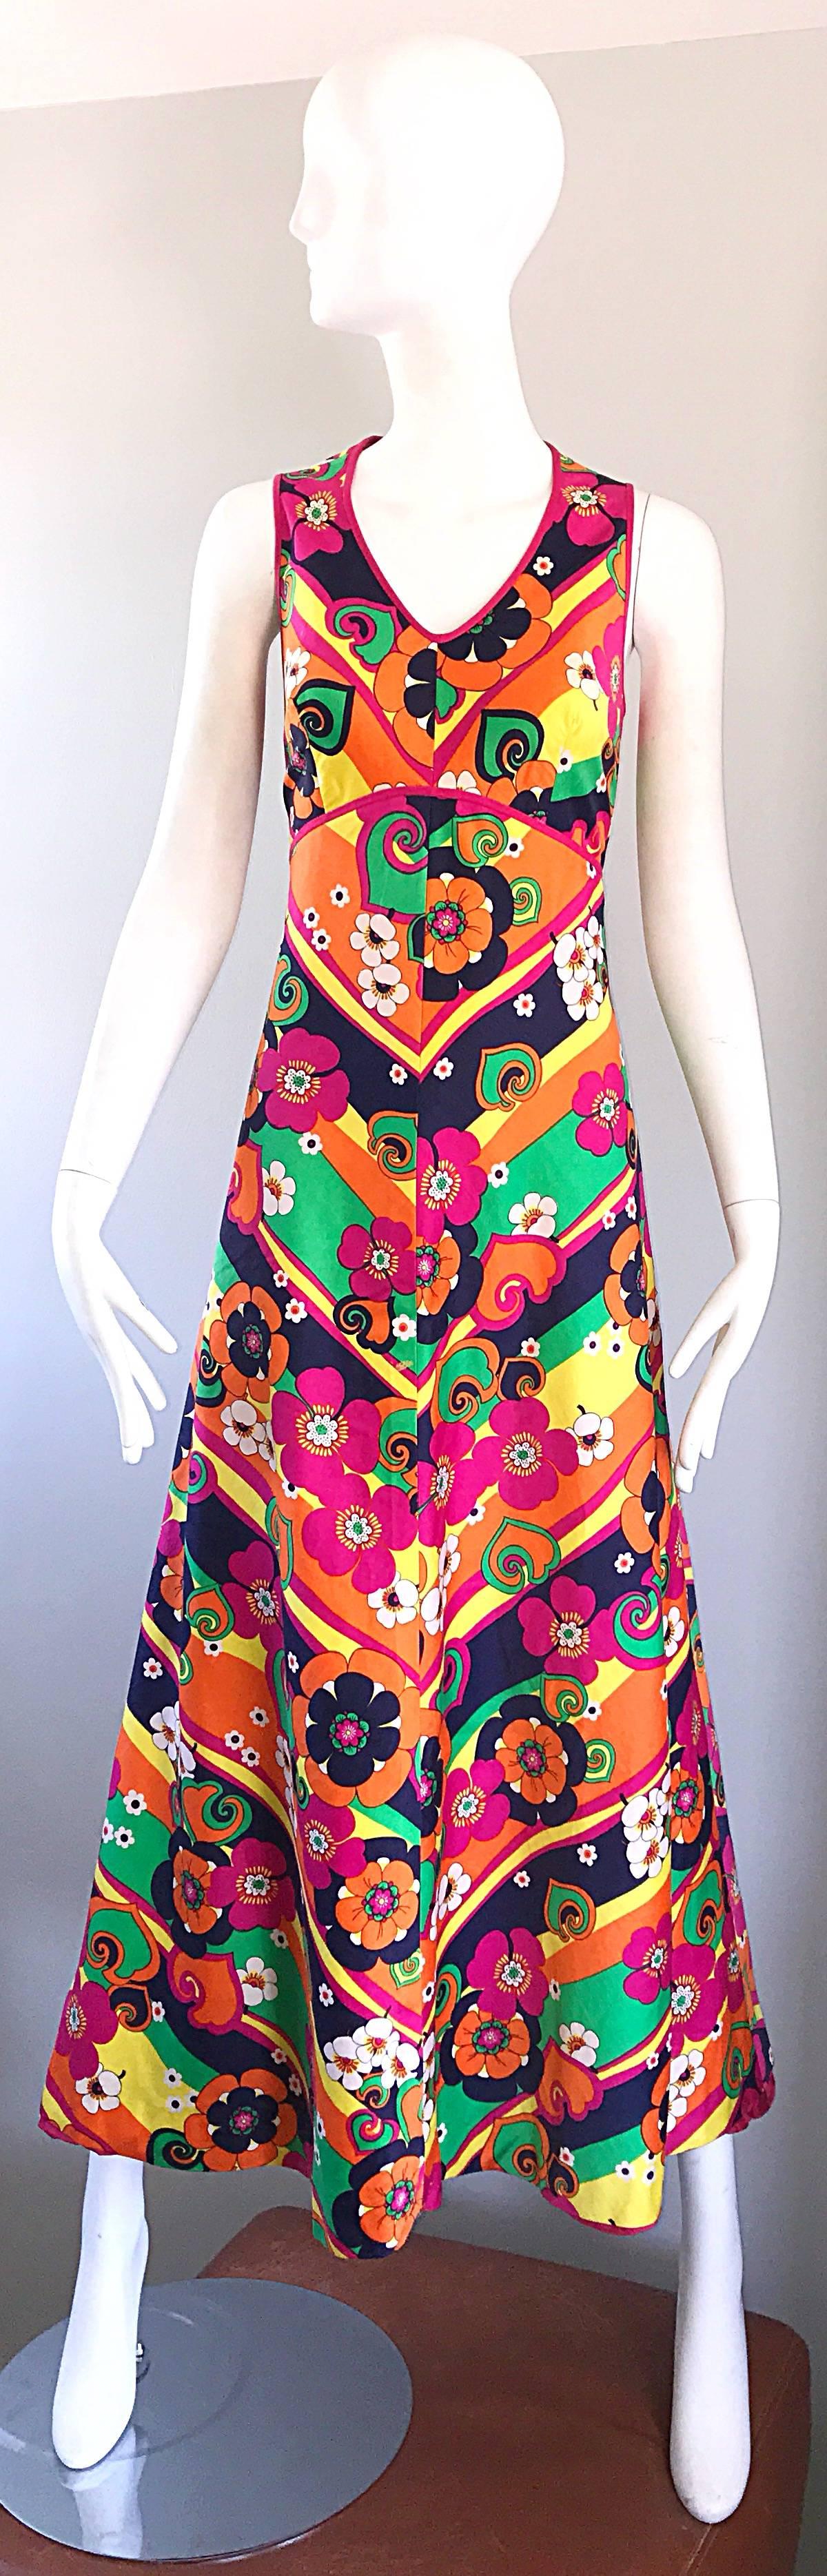 Amazing 1970s colorful cotton maxi dress! Features vibrant colors of pink, green, yellow, orange, white navy blue in flowers and stretch. Fitted bodice with a full body. Fully lined in pink. Very well made, with lots of attention to detail. Hidden